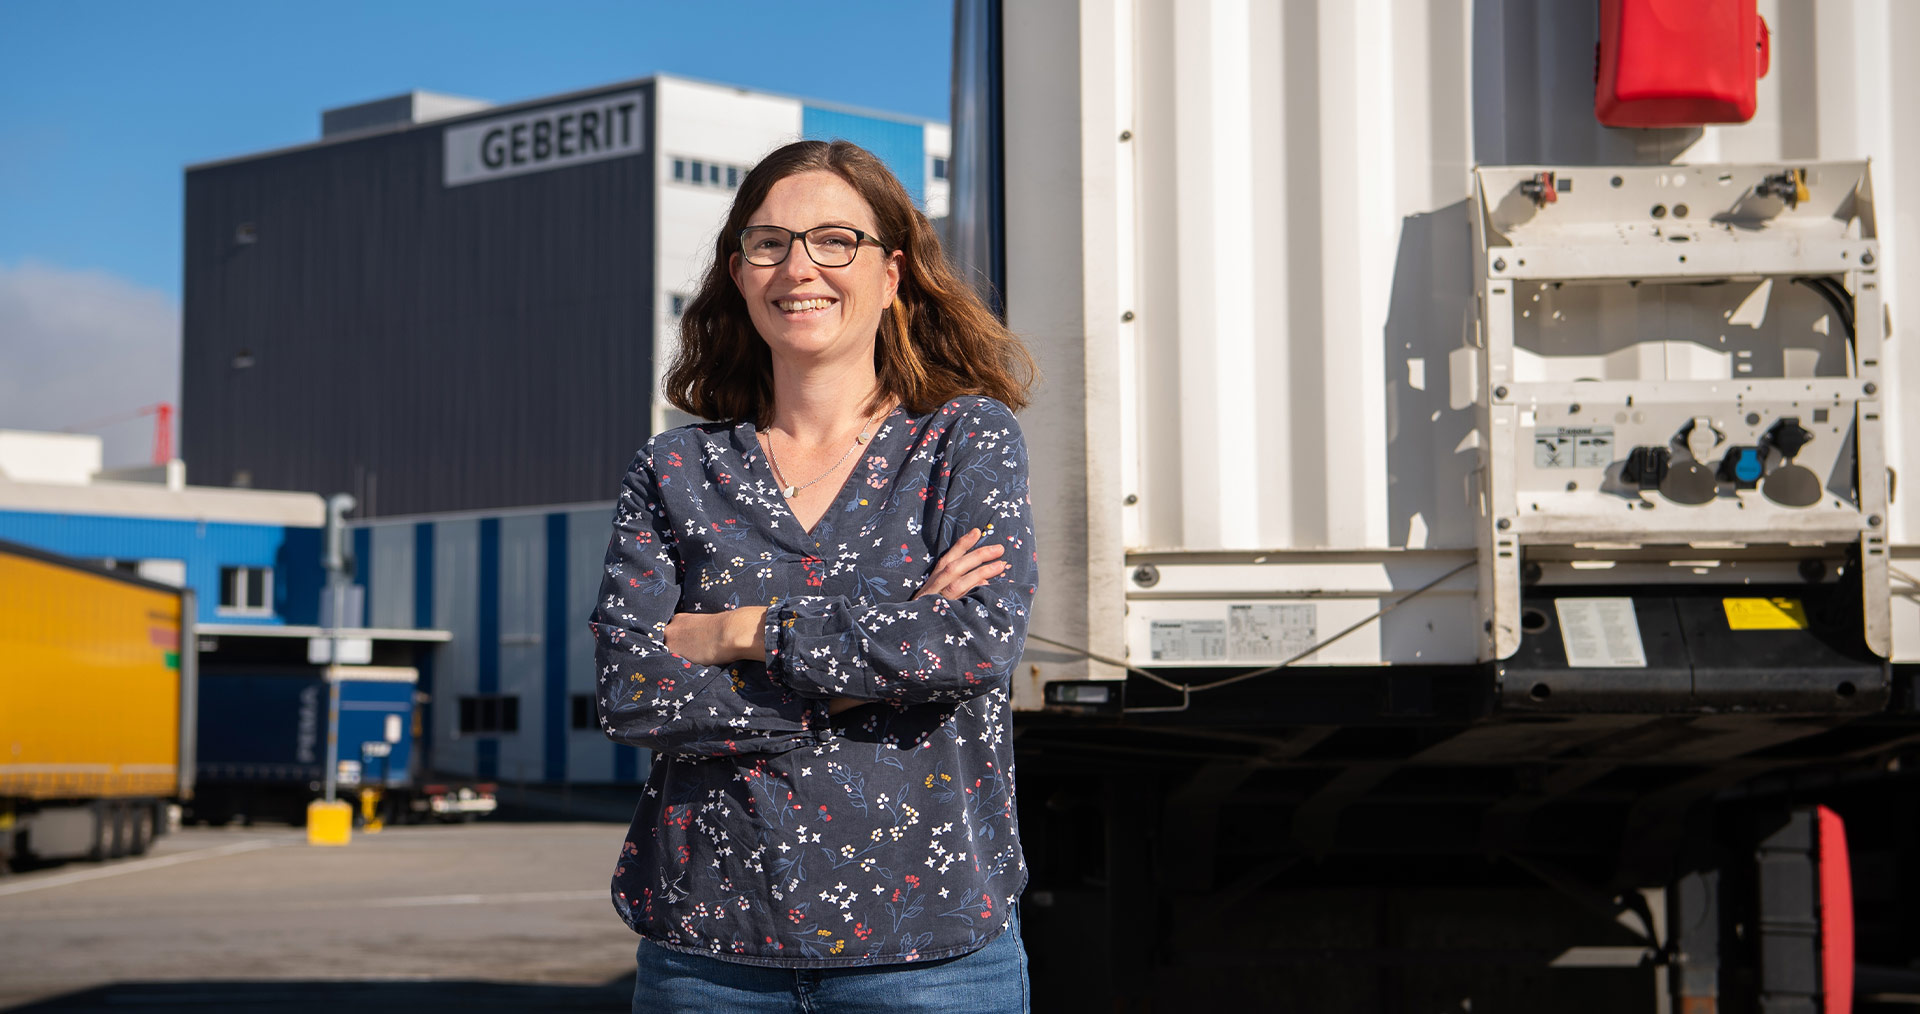 Julia Dreher, Head of Group Logistics, standing in front of the Geberit logistics center in Pfullendorf